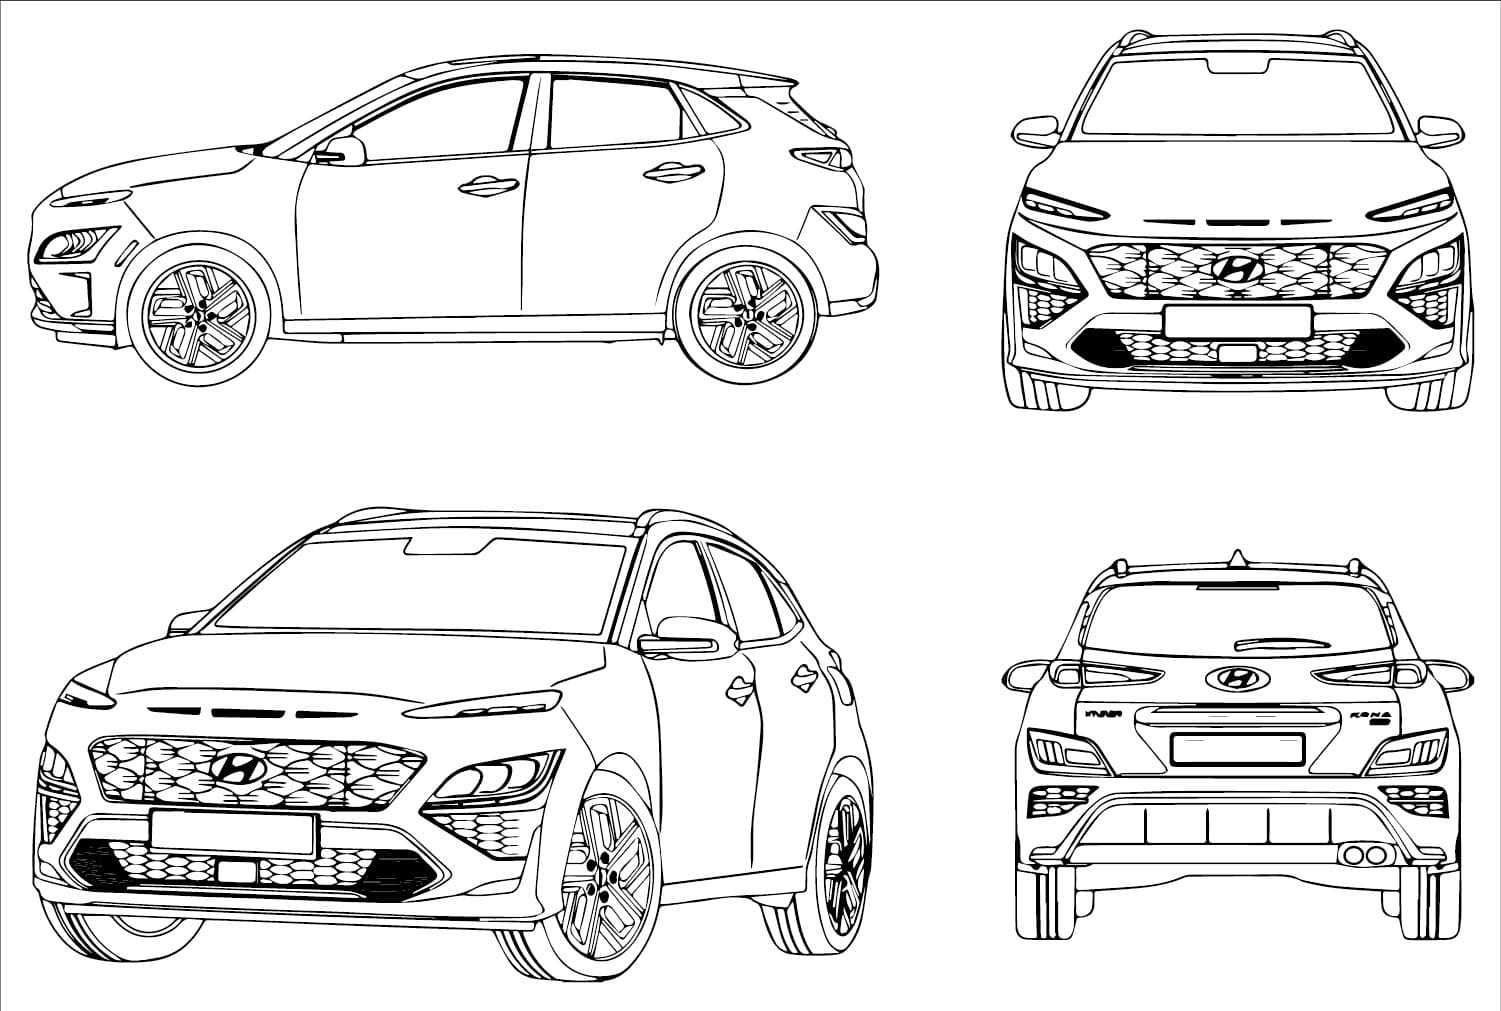 Awesome Hyundai coloring page - Download, Print or Color Online for Free